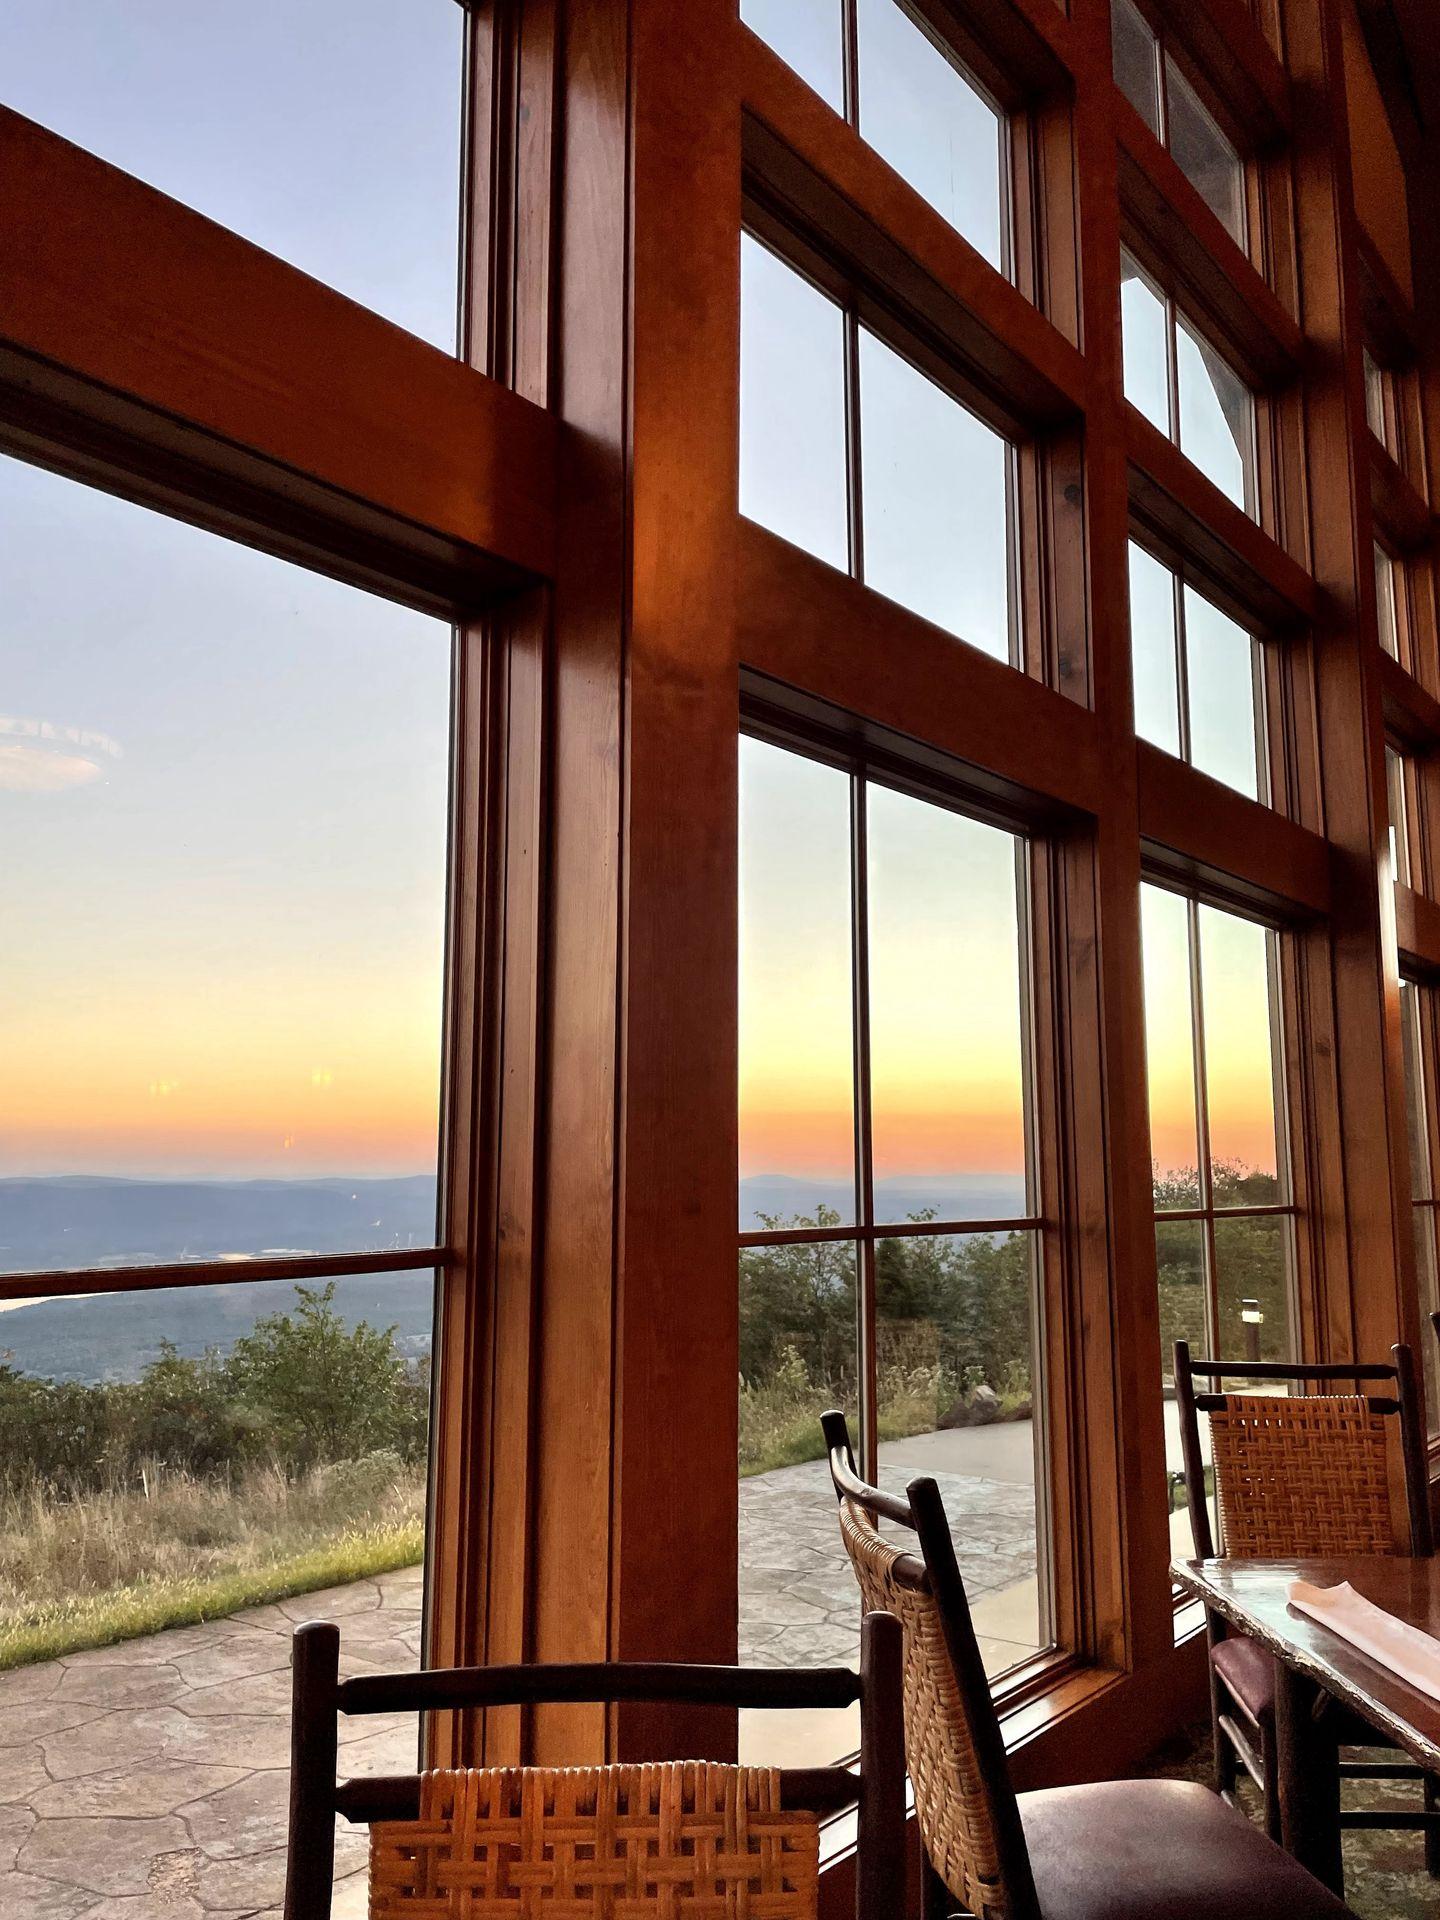 Looking through the windows of the Mount Magazine Lodge at a sunset.